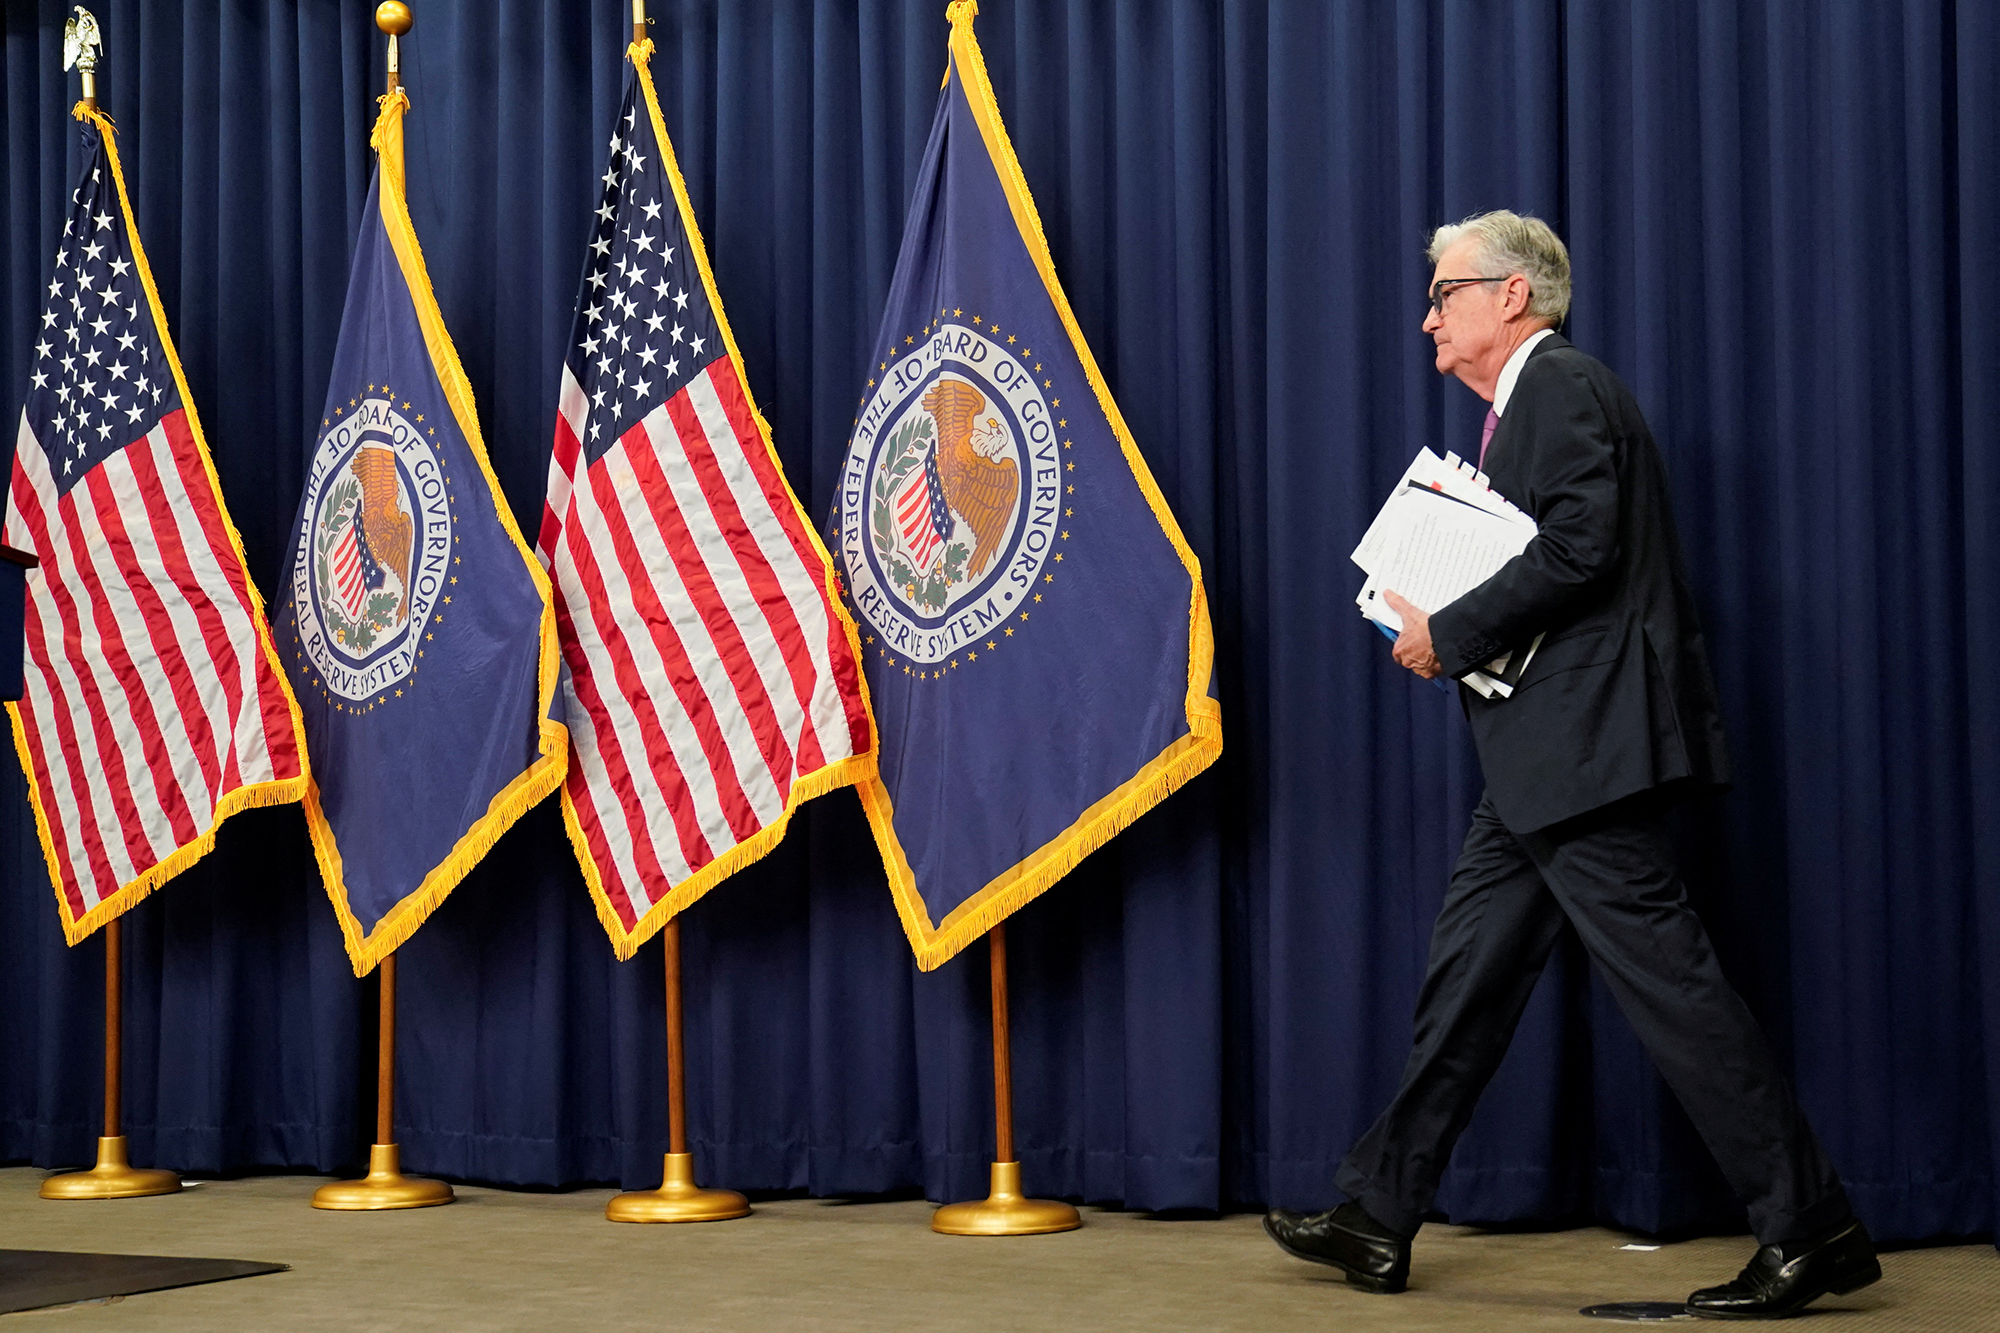 Federal Reserve Board Chairman Jerome Powell arriving at the news conference earlier today in Washington, DC.